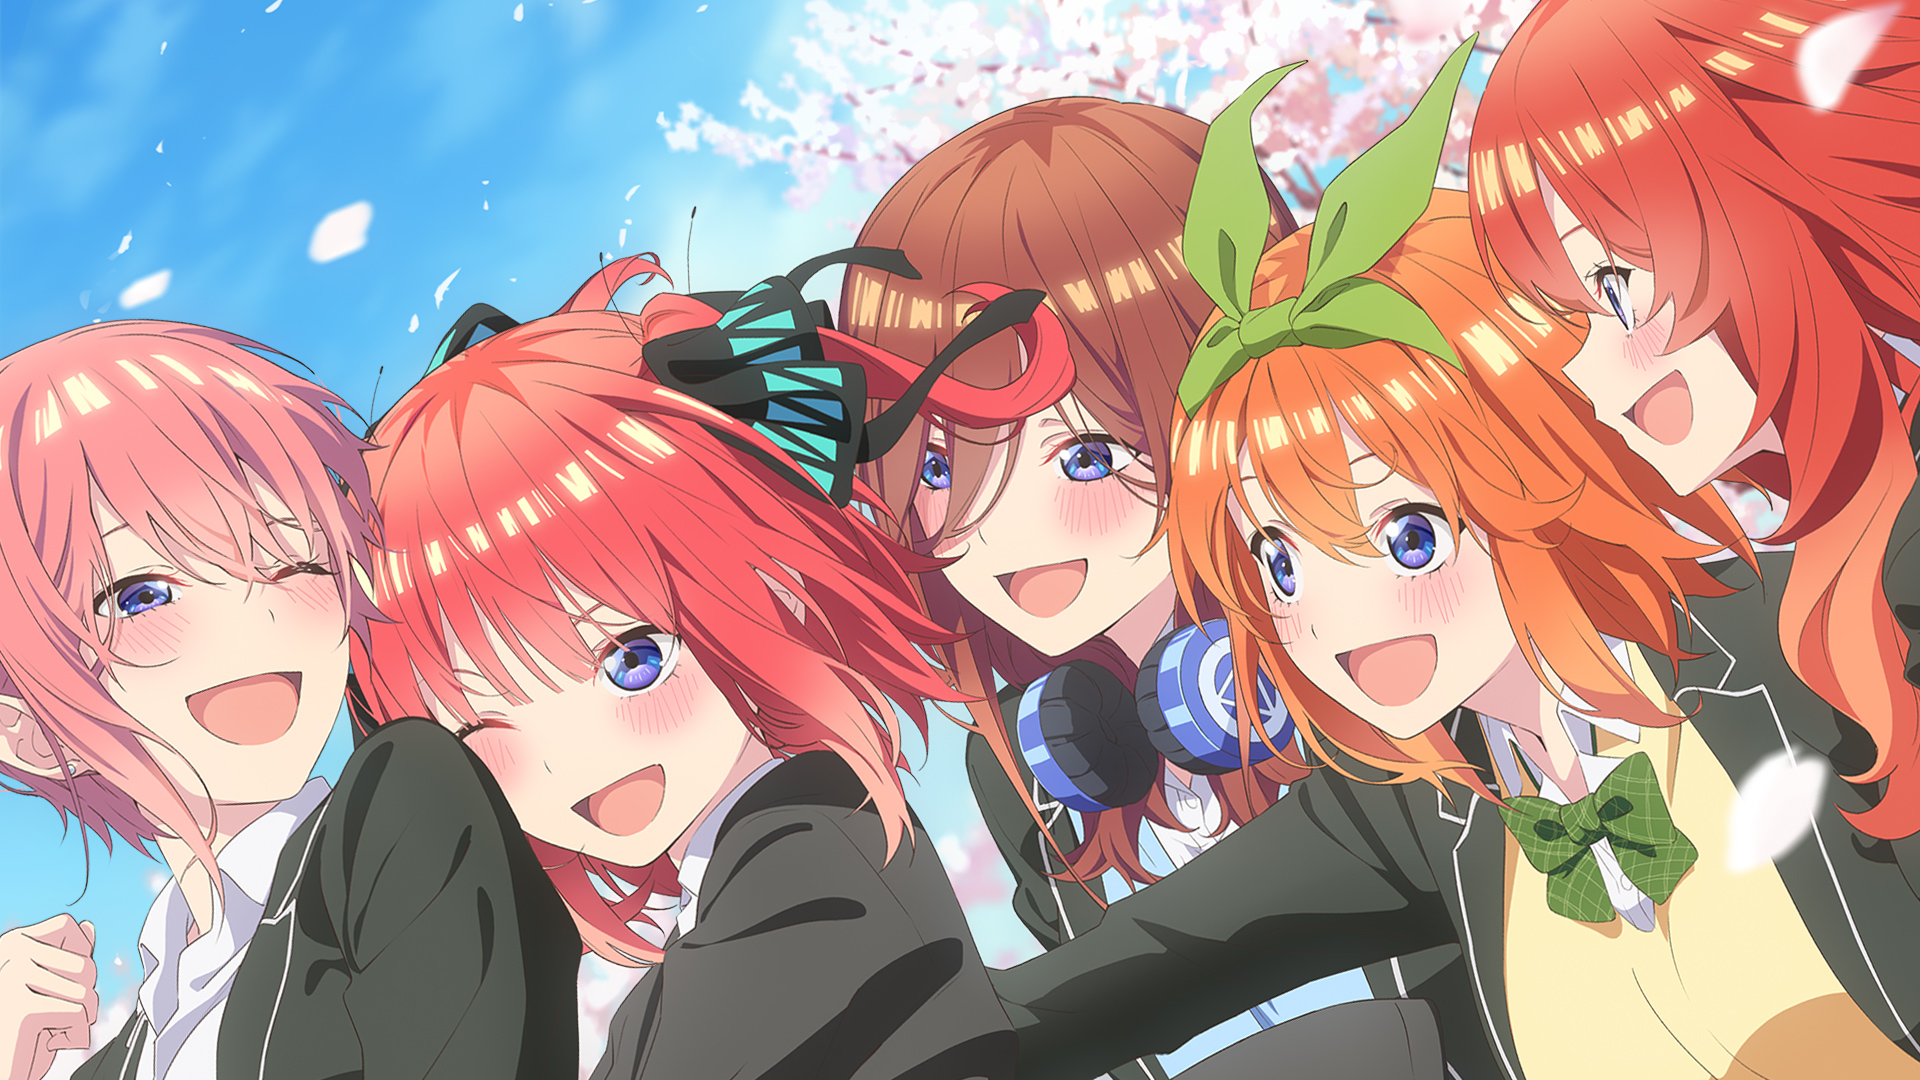 The Quintessential Quintuplets Season 2 Postponed to January 2021